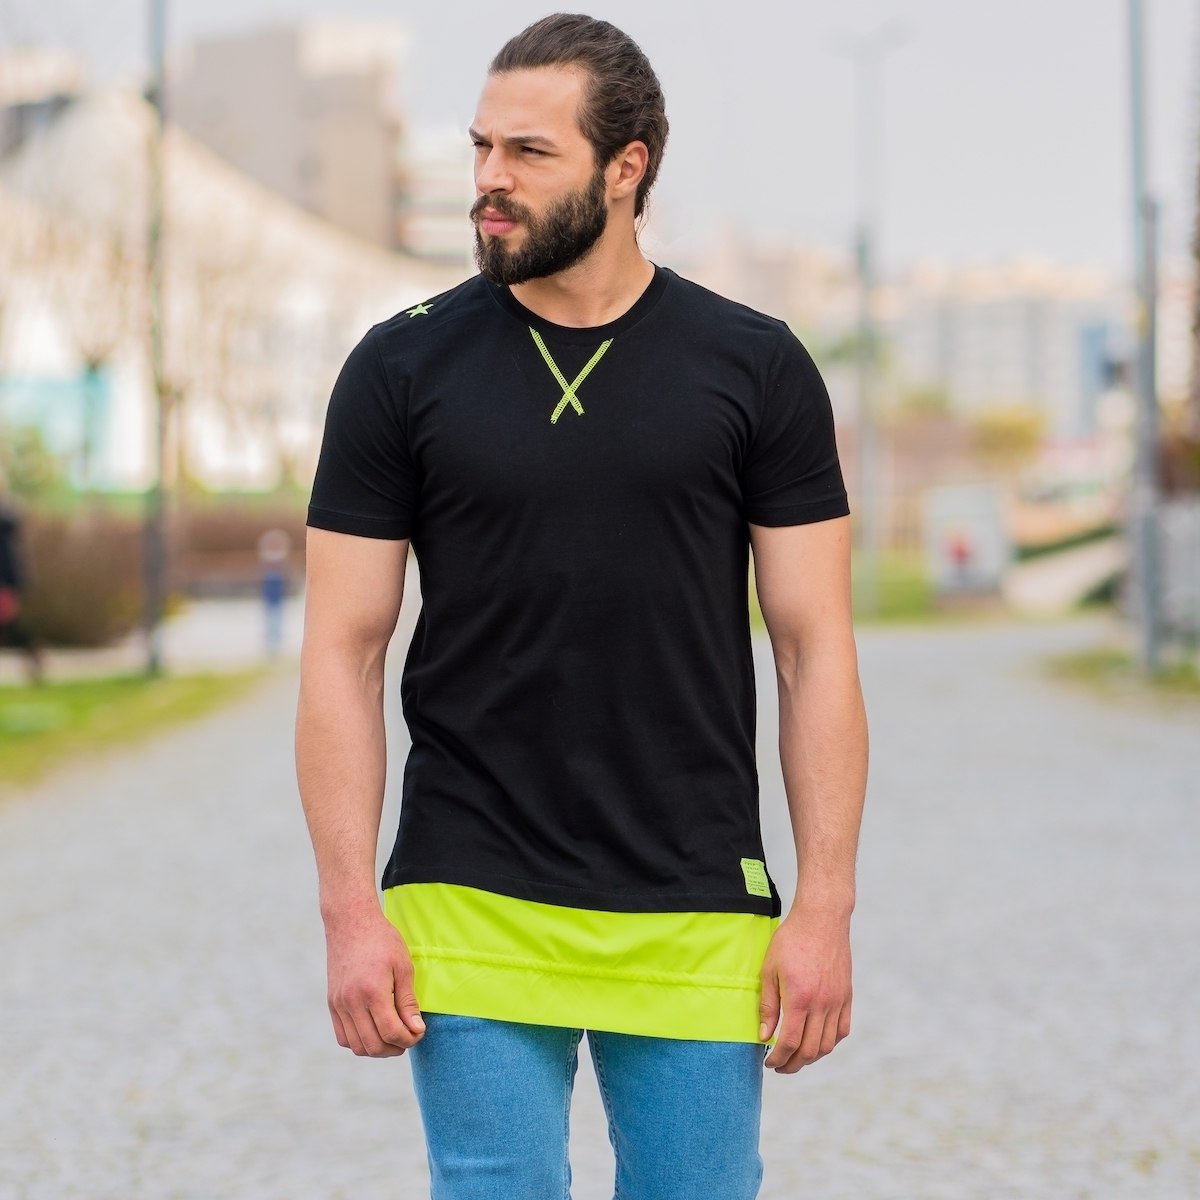 Men's Double-Tailed Neon Oversize T-Shirt In Black - 1